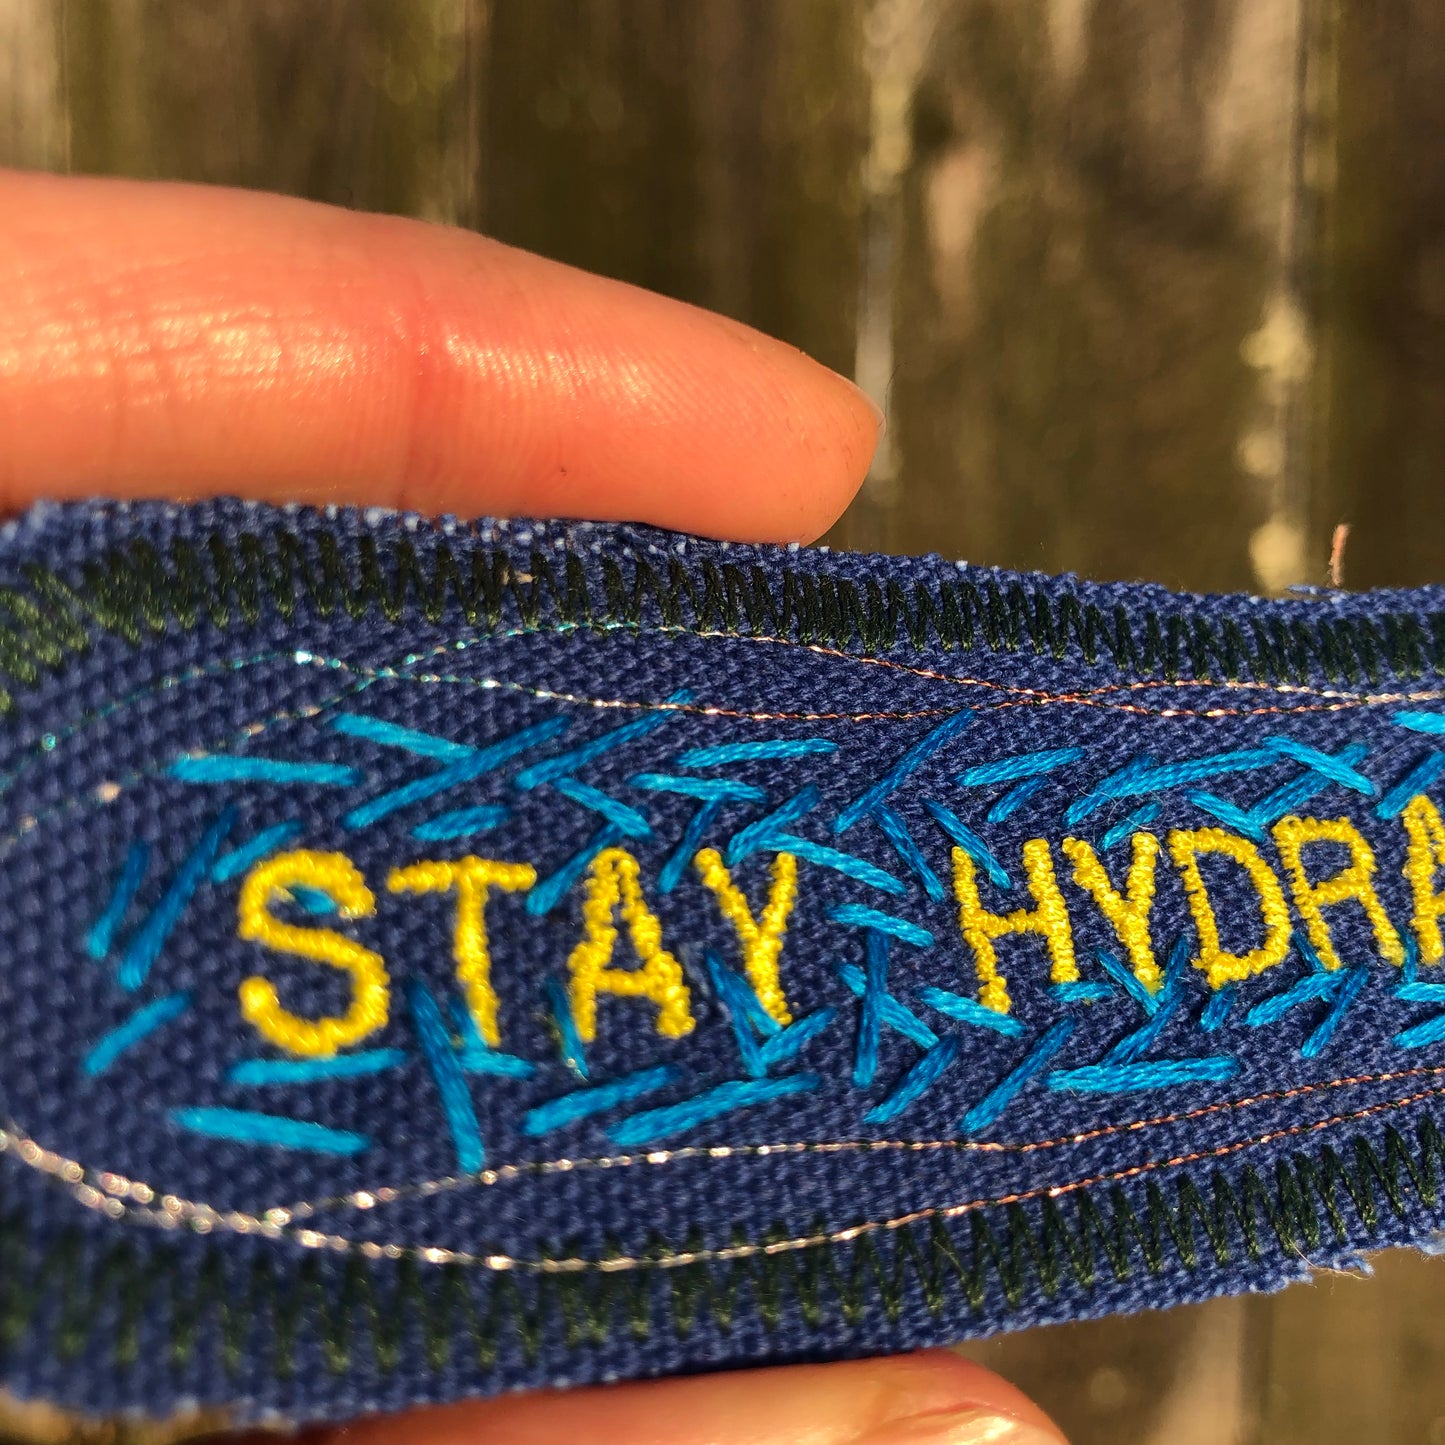 Stay Hydrated - Handmade Embroidered Canvas Patch